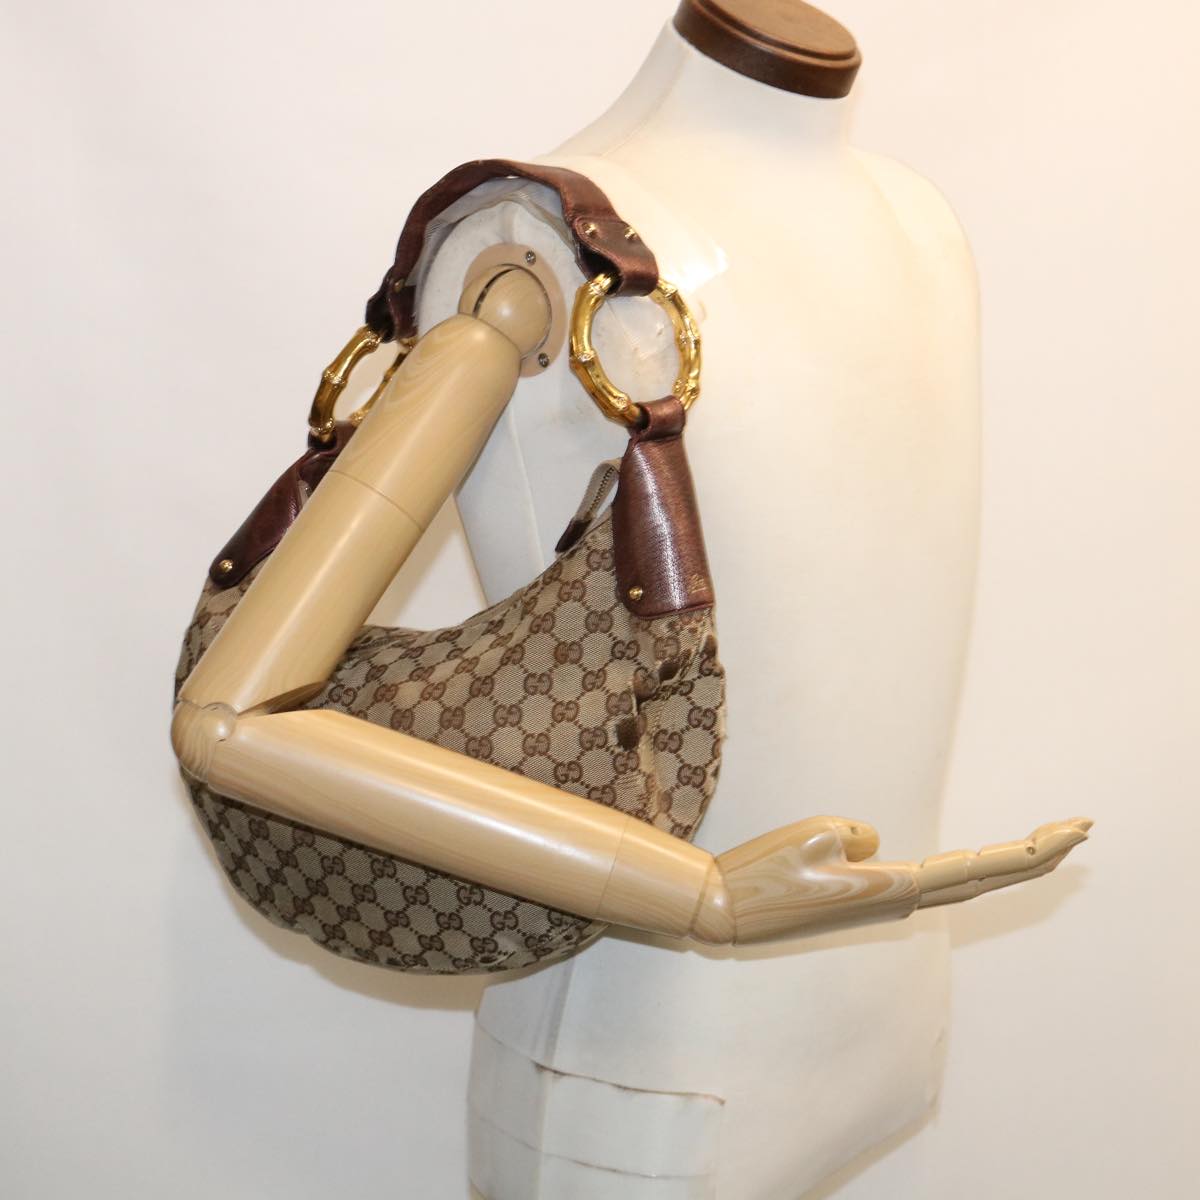 GUCCI GG Canvas Bamboo Shoulder Bag Beige Auth cl161